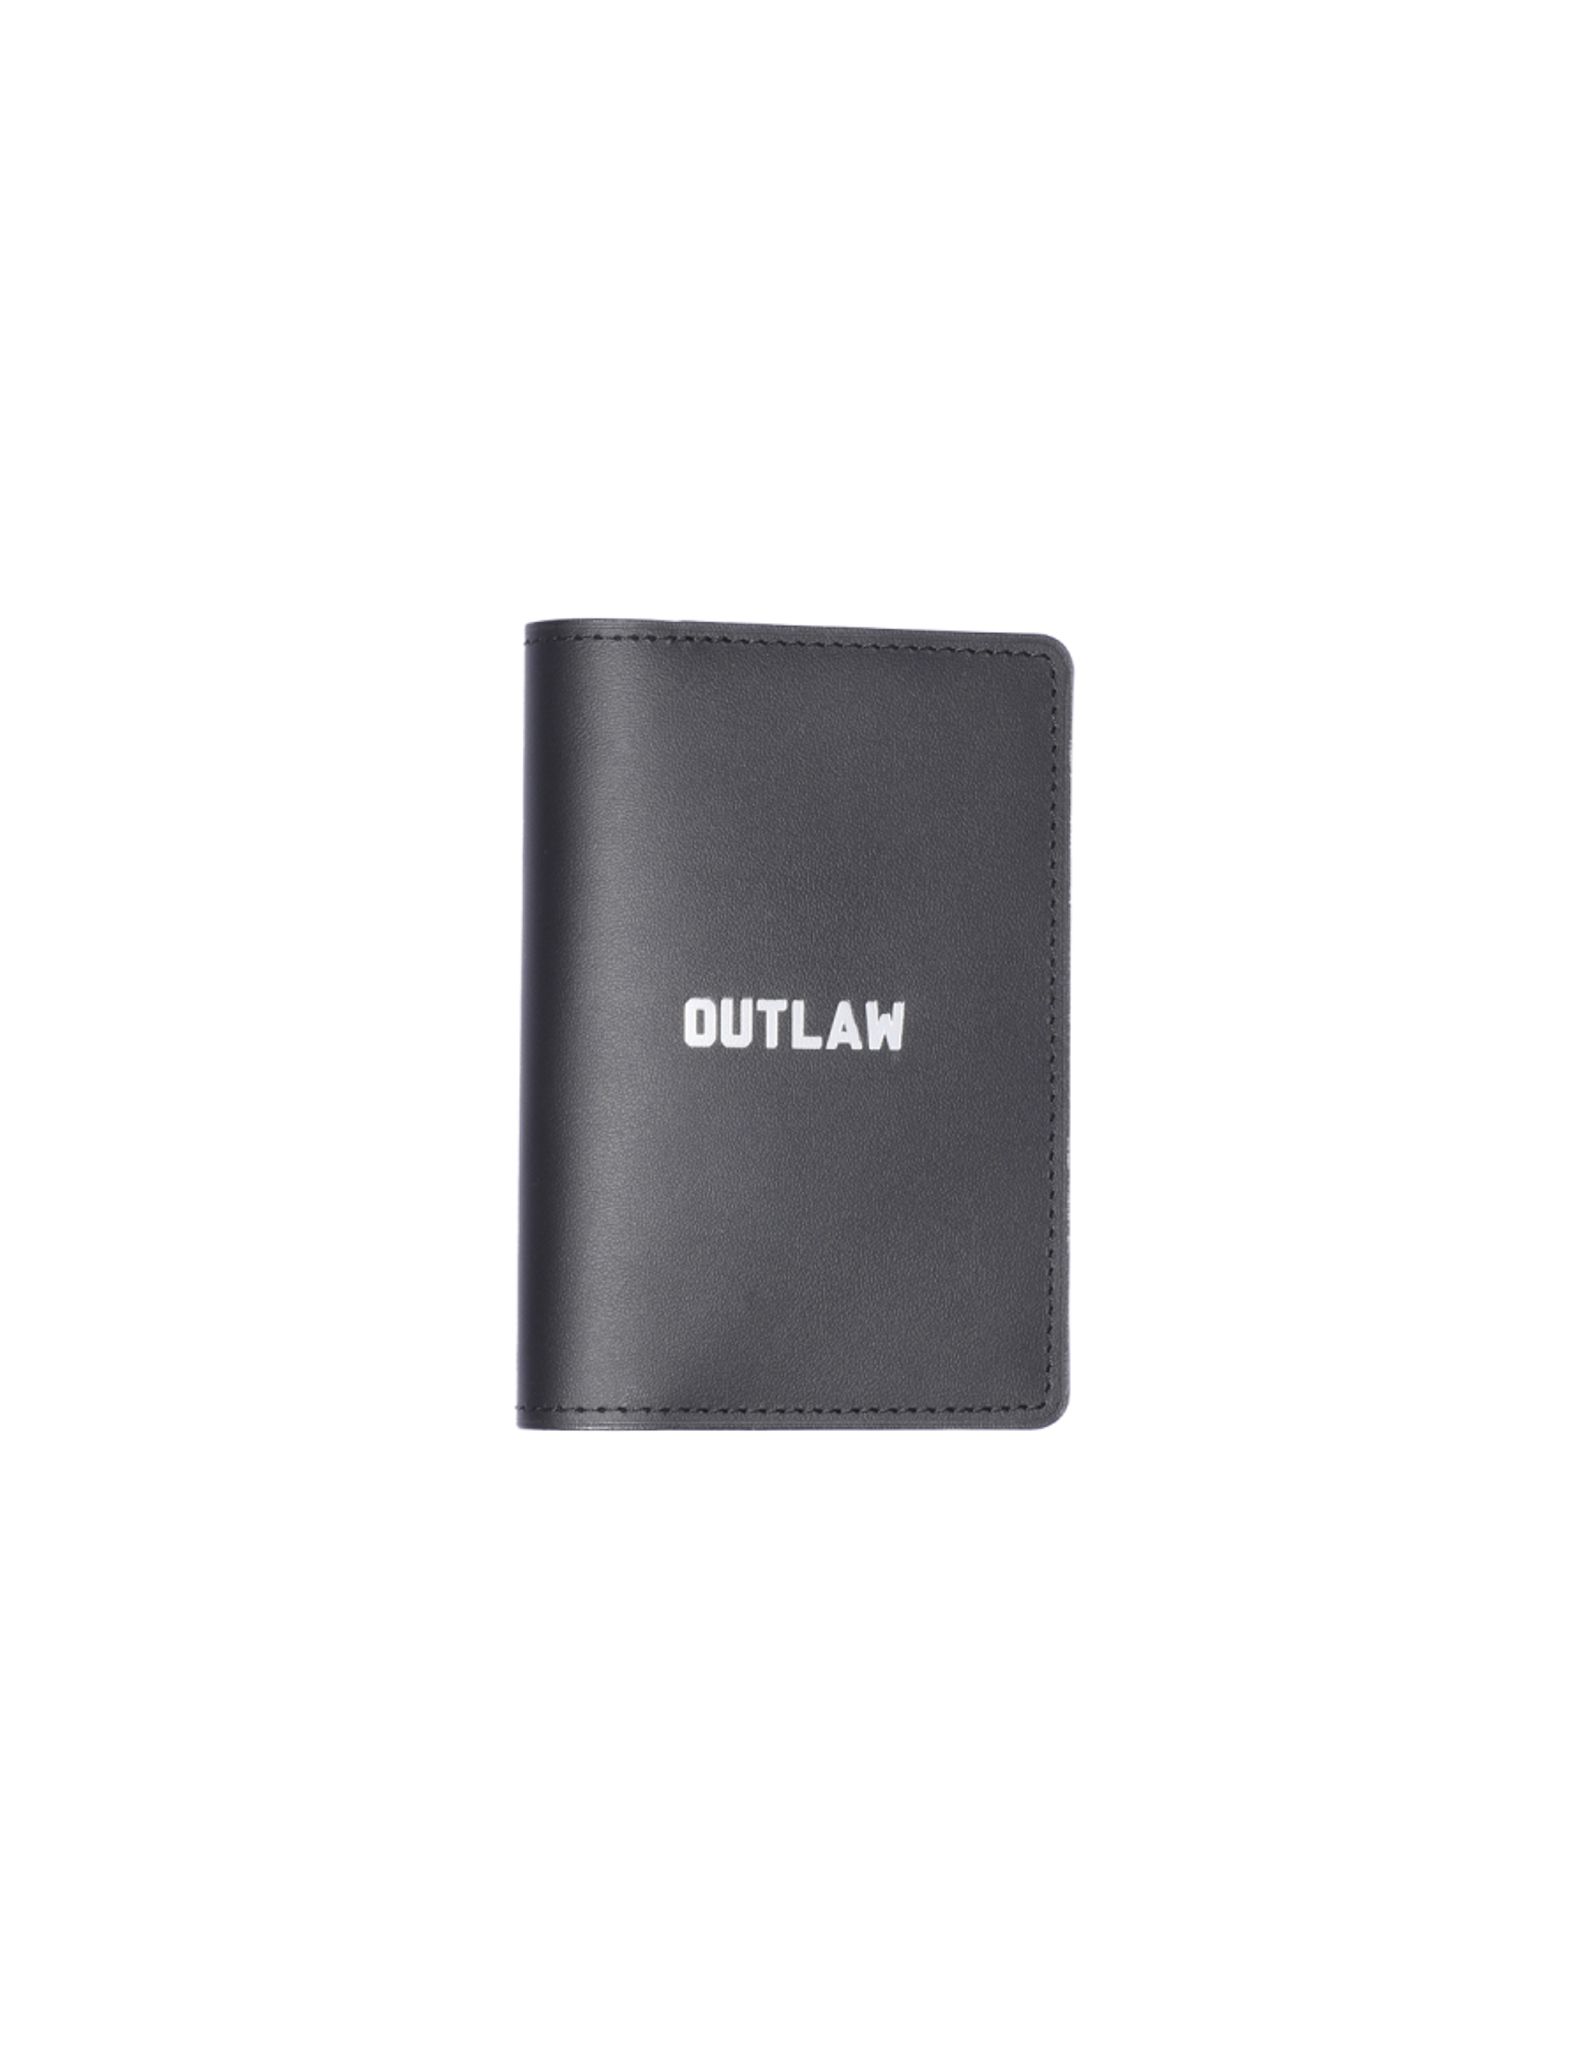 Black Outlaw Passport Cover